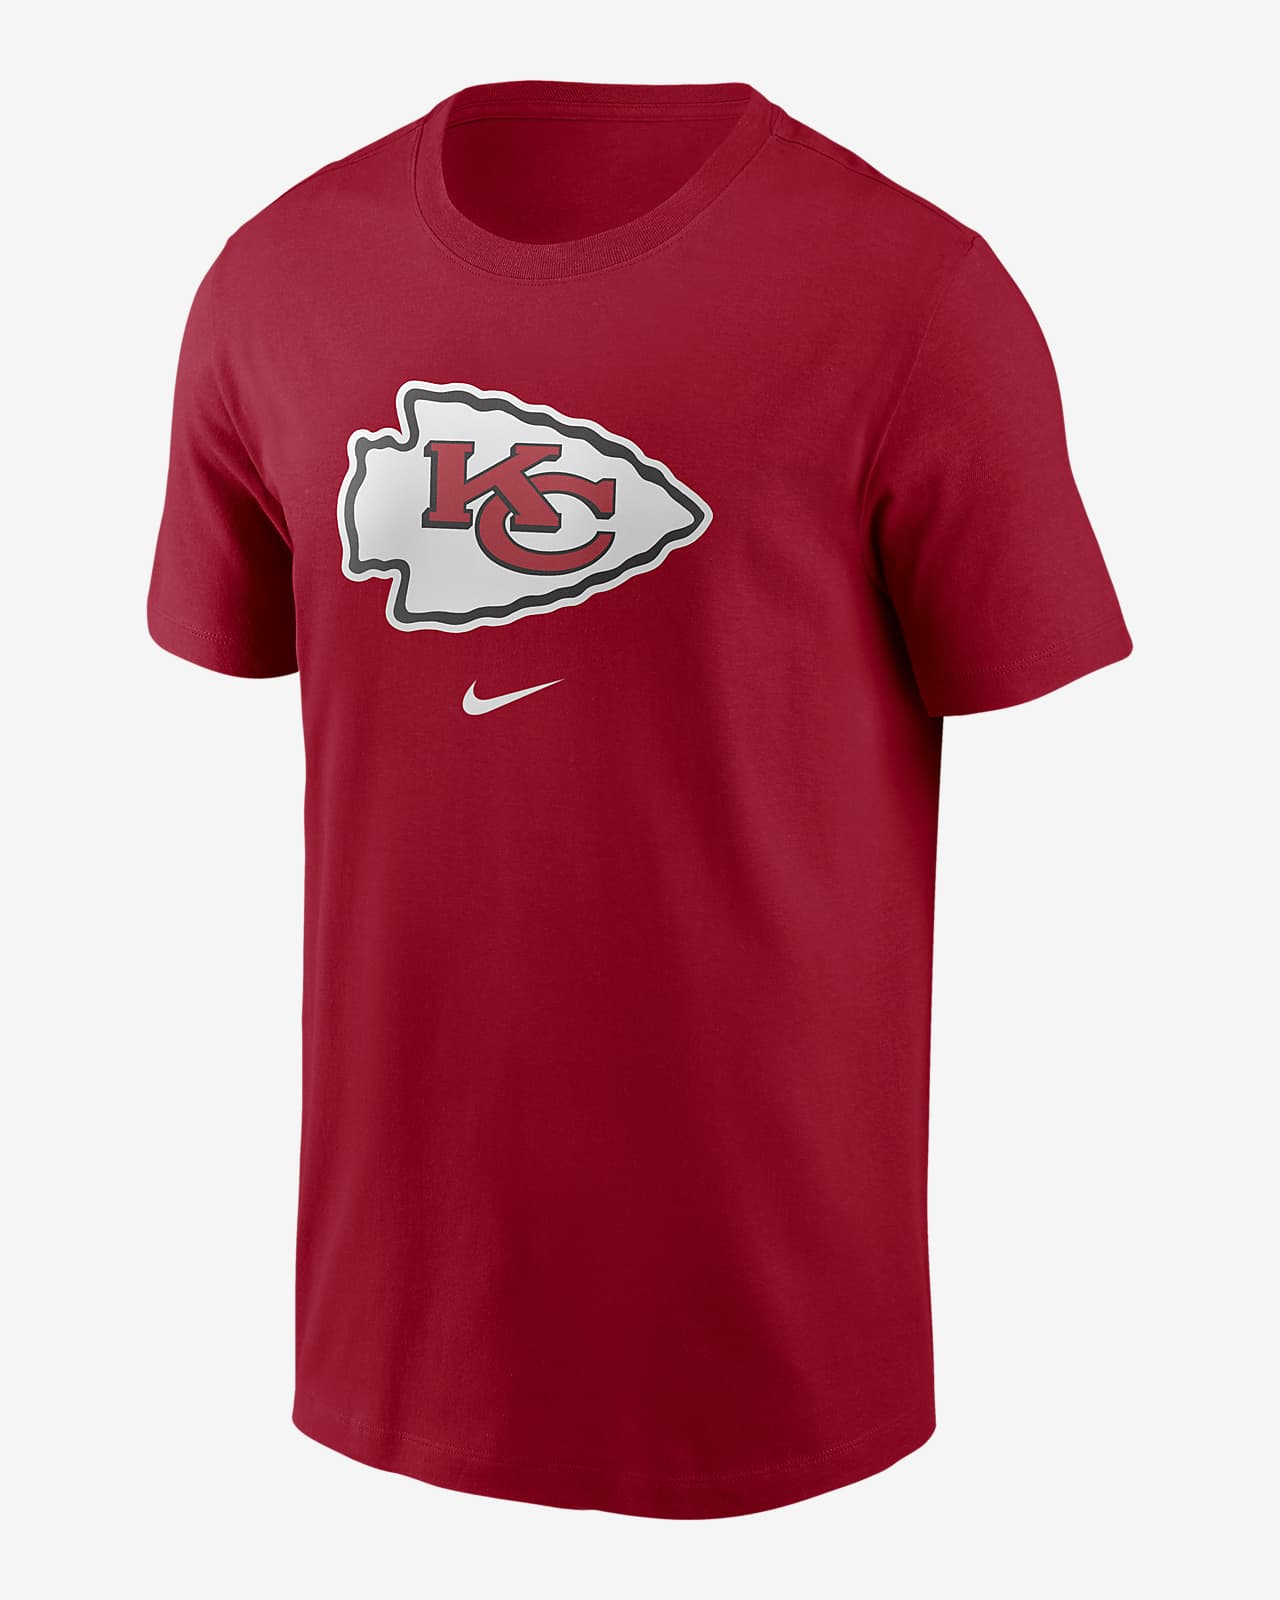 nfl t shirts for boys